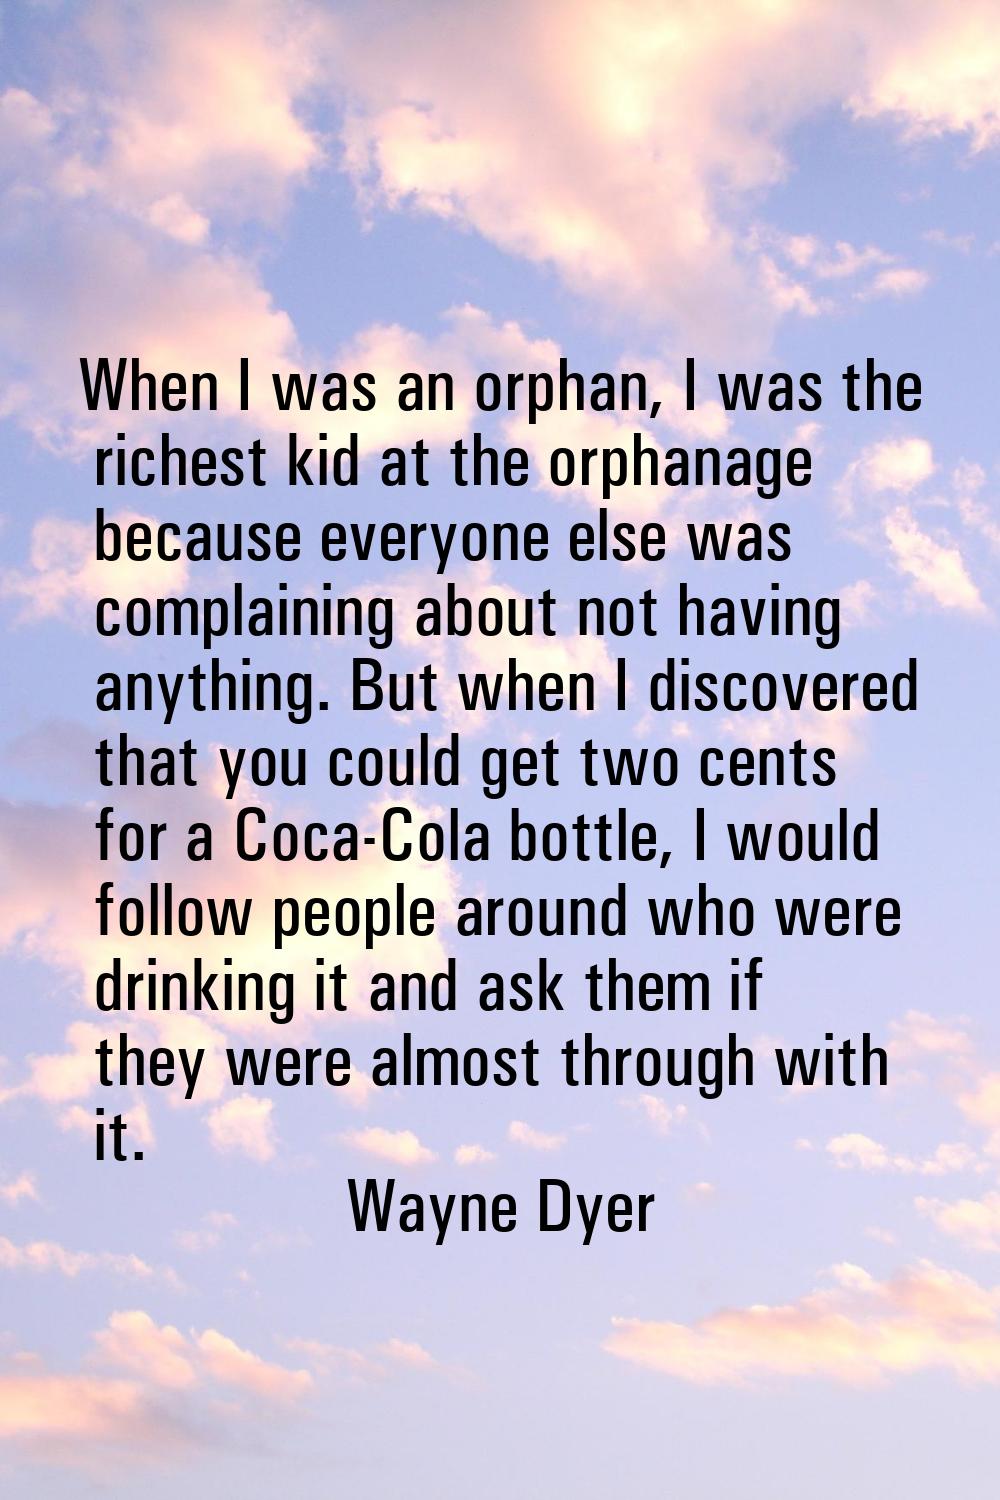 When I was an orphan, I was the richest kid at the orphanage because everyone else was complaining 